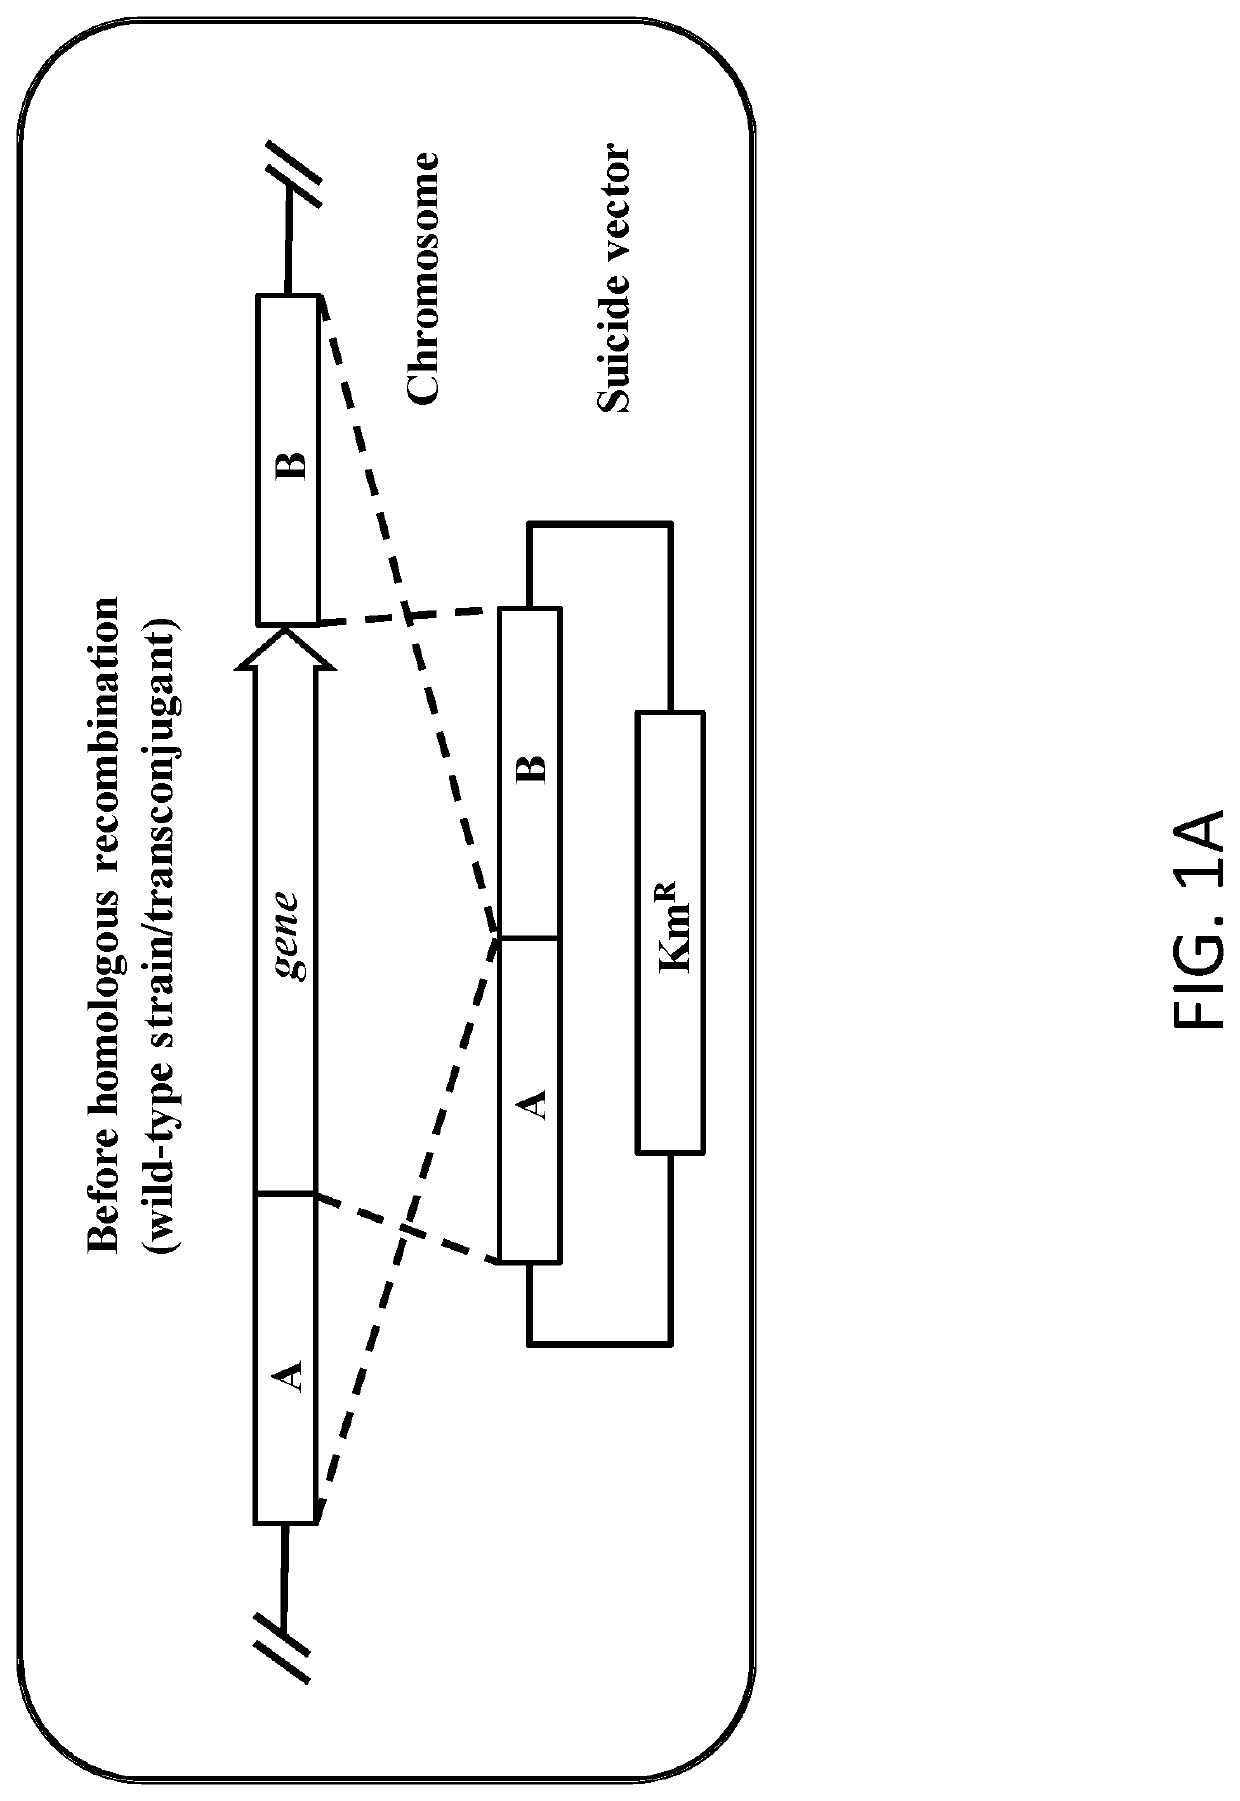 Recombinant Microorganism for Producing 2,3-Butanediol and a Method of Production of 2,3-Butanediol